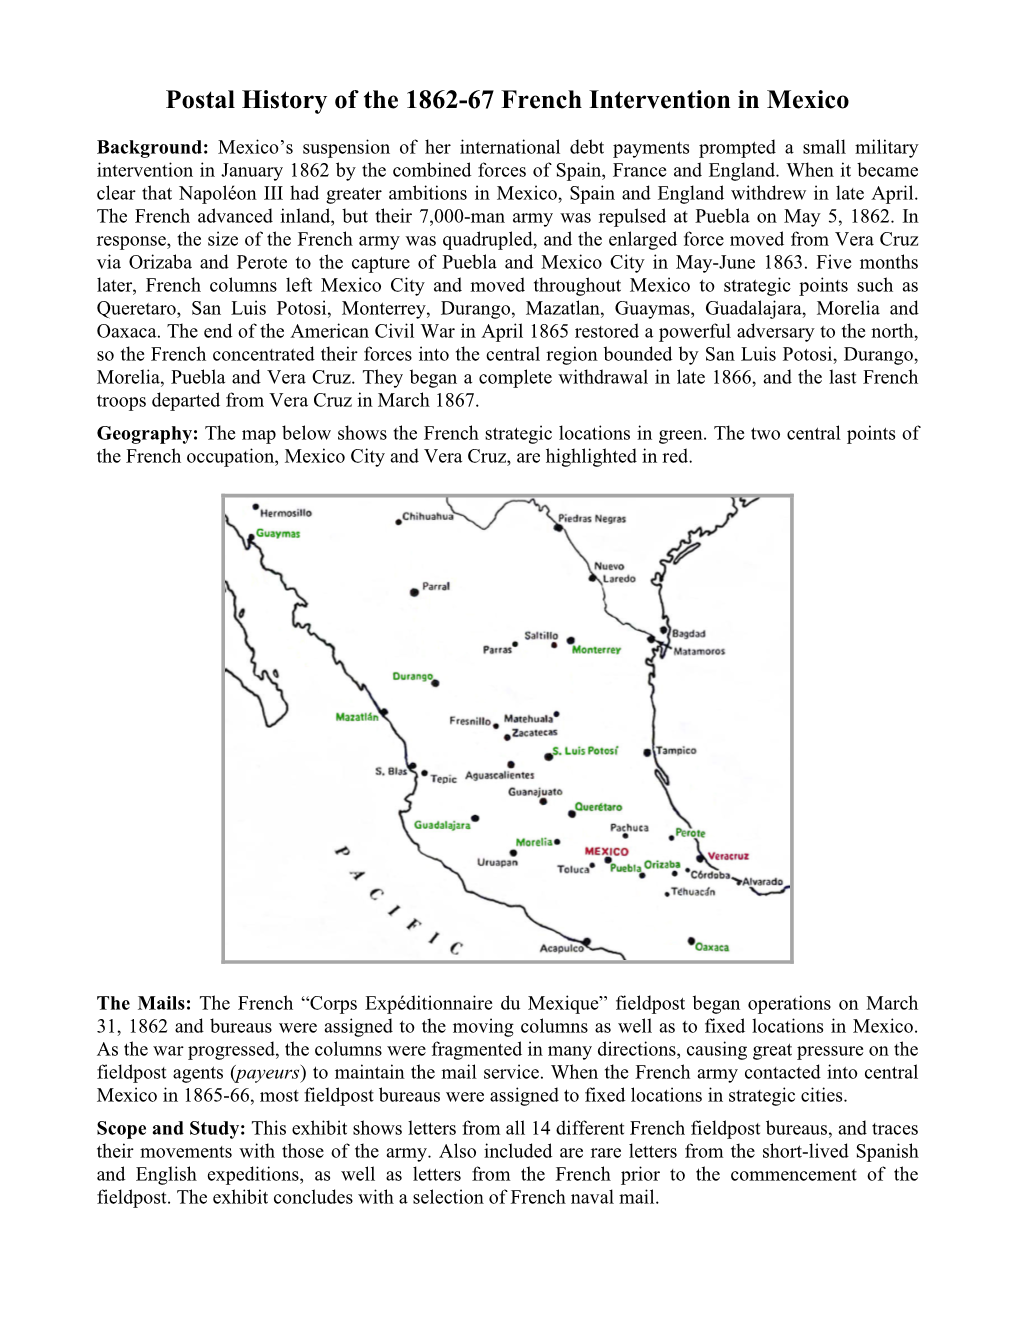 Postal History of the 1862-67 French Intervention in Mexico